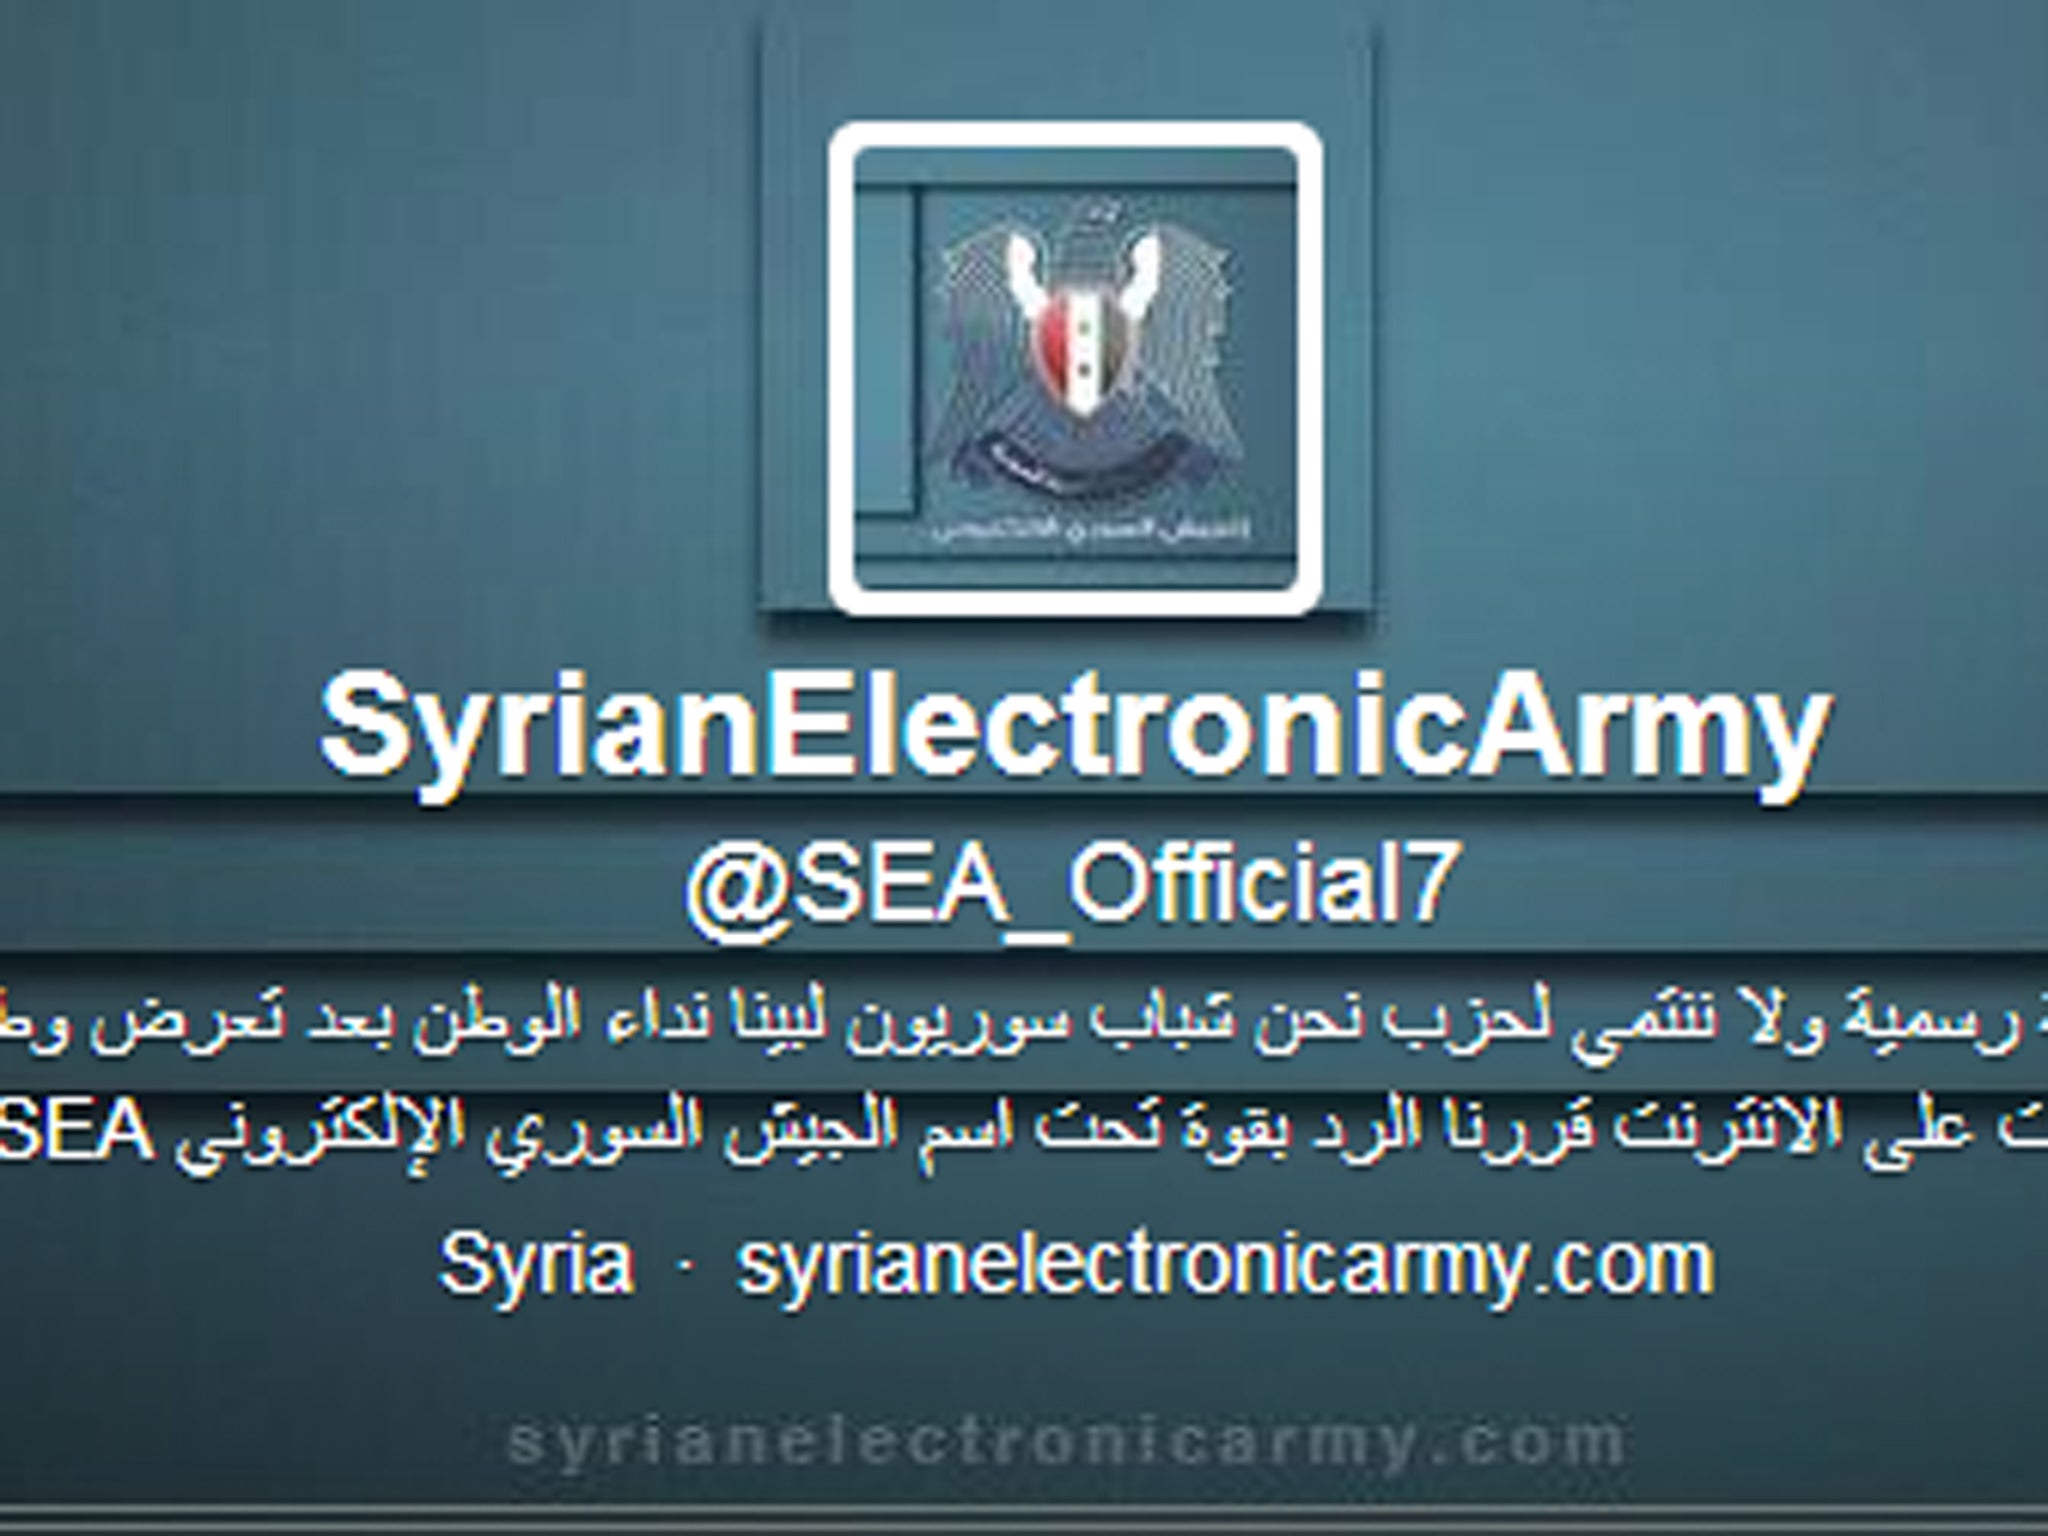 The Syrian Electronic Army is now on its seventh Twitter account after the previous six were shut down